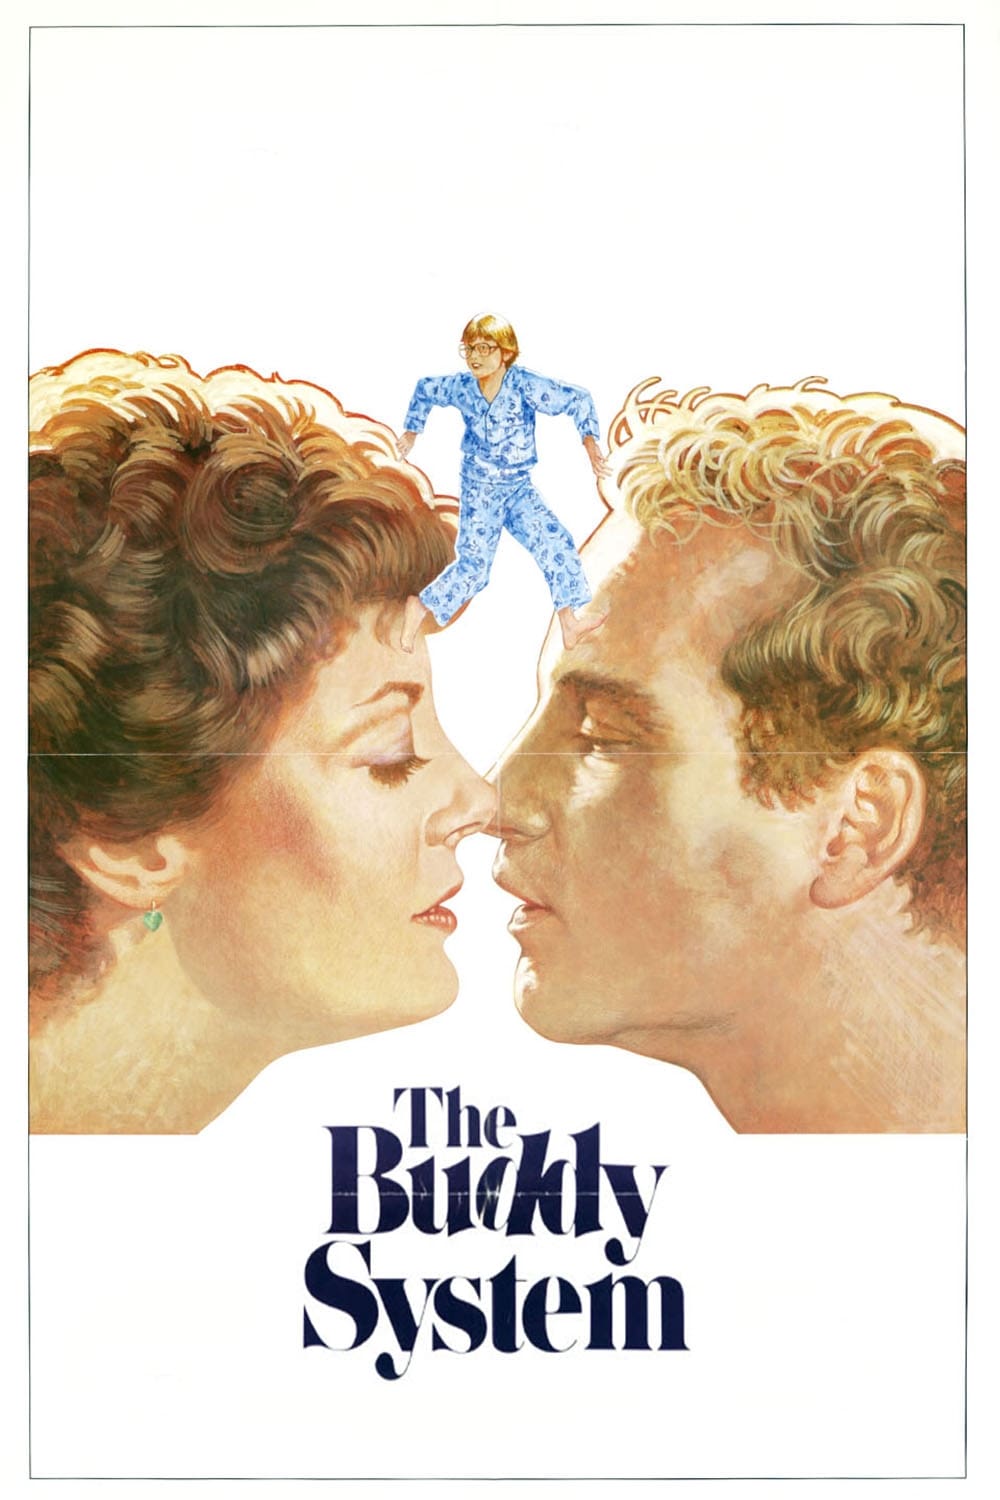 The Buddy System (1984)